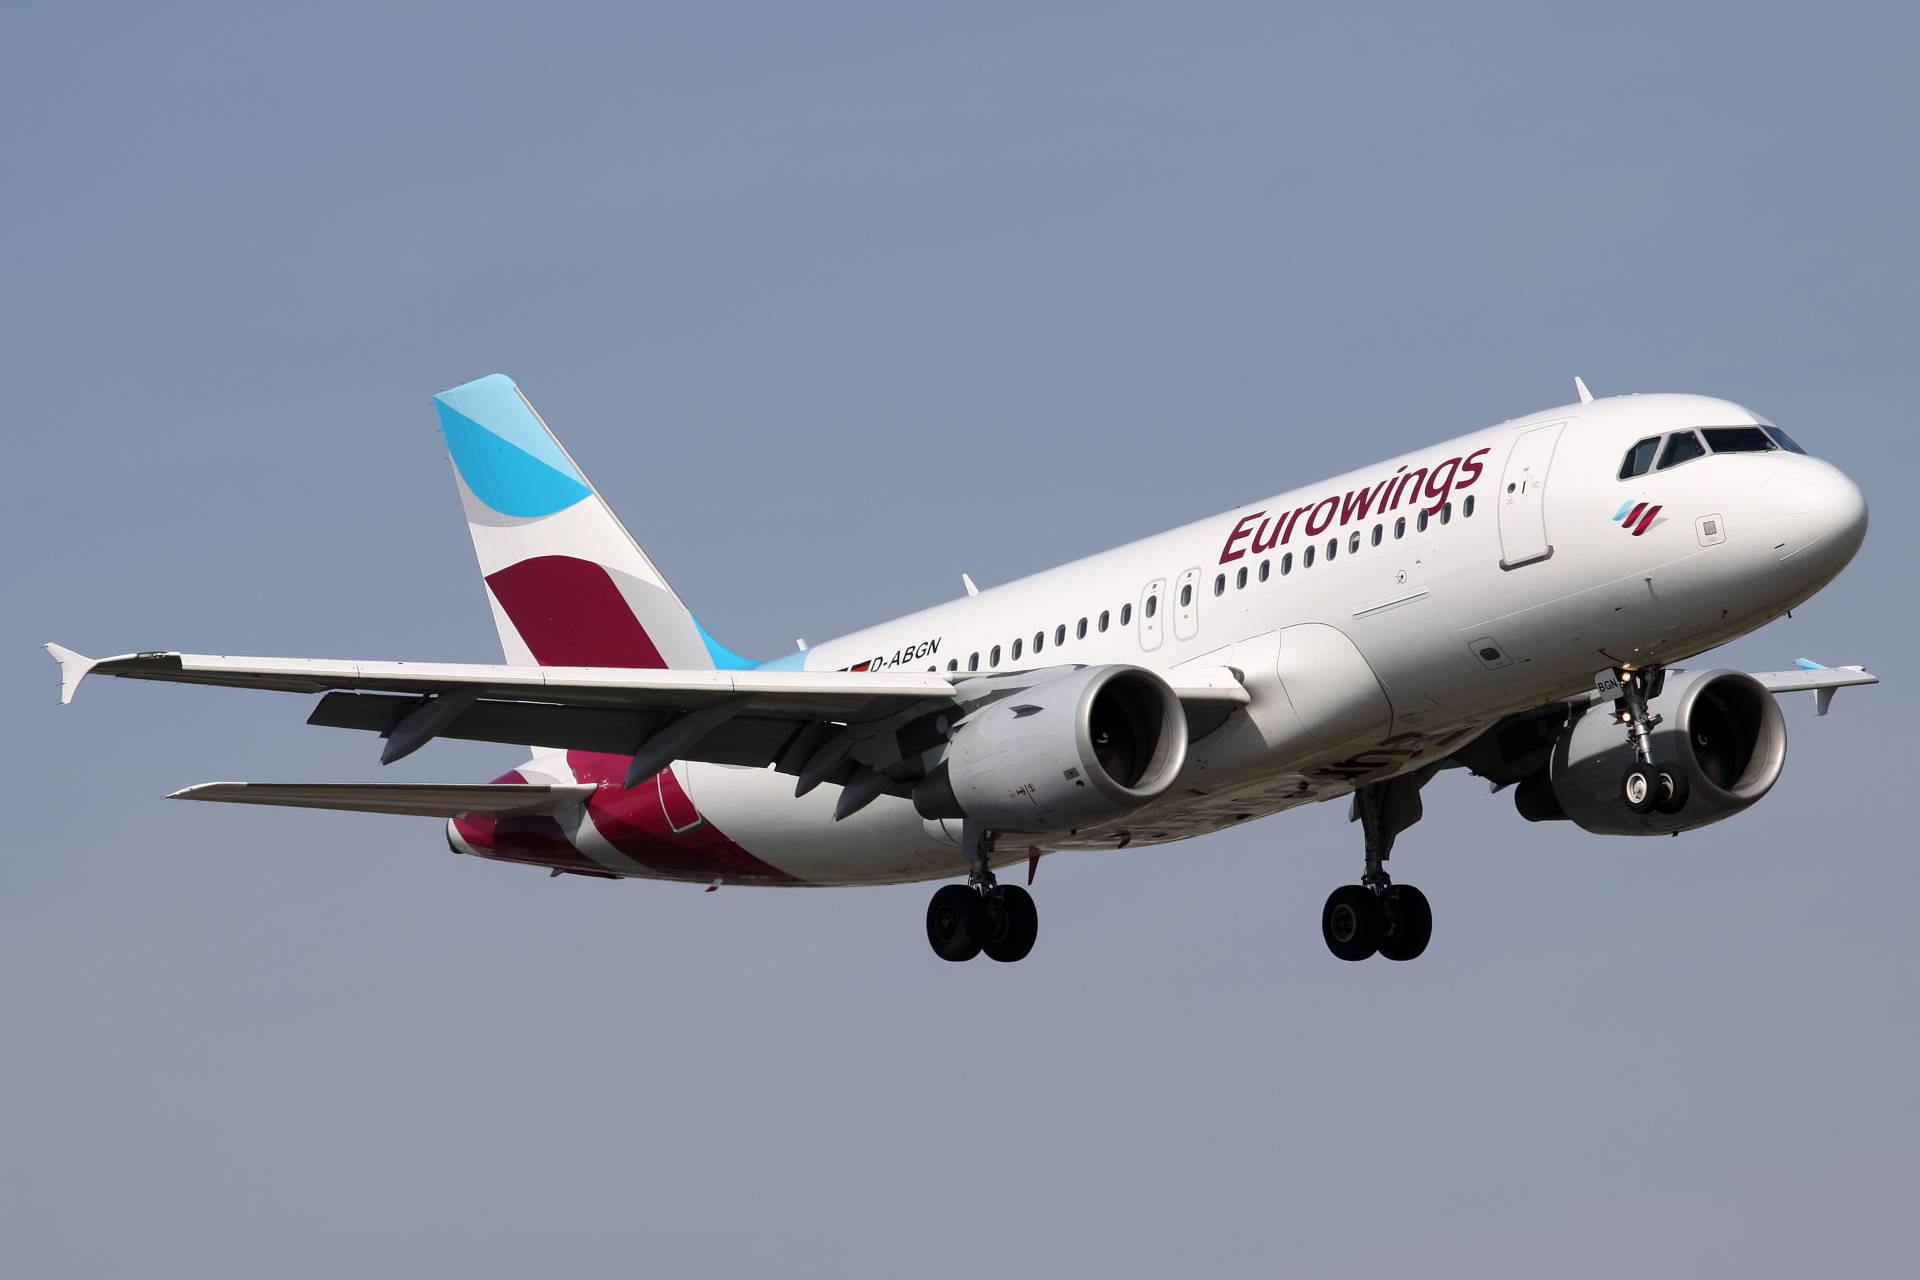 D-ABGN, Eurowings (Aircraft » EPWA Spotting » Airbus A319-100)